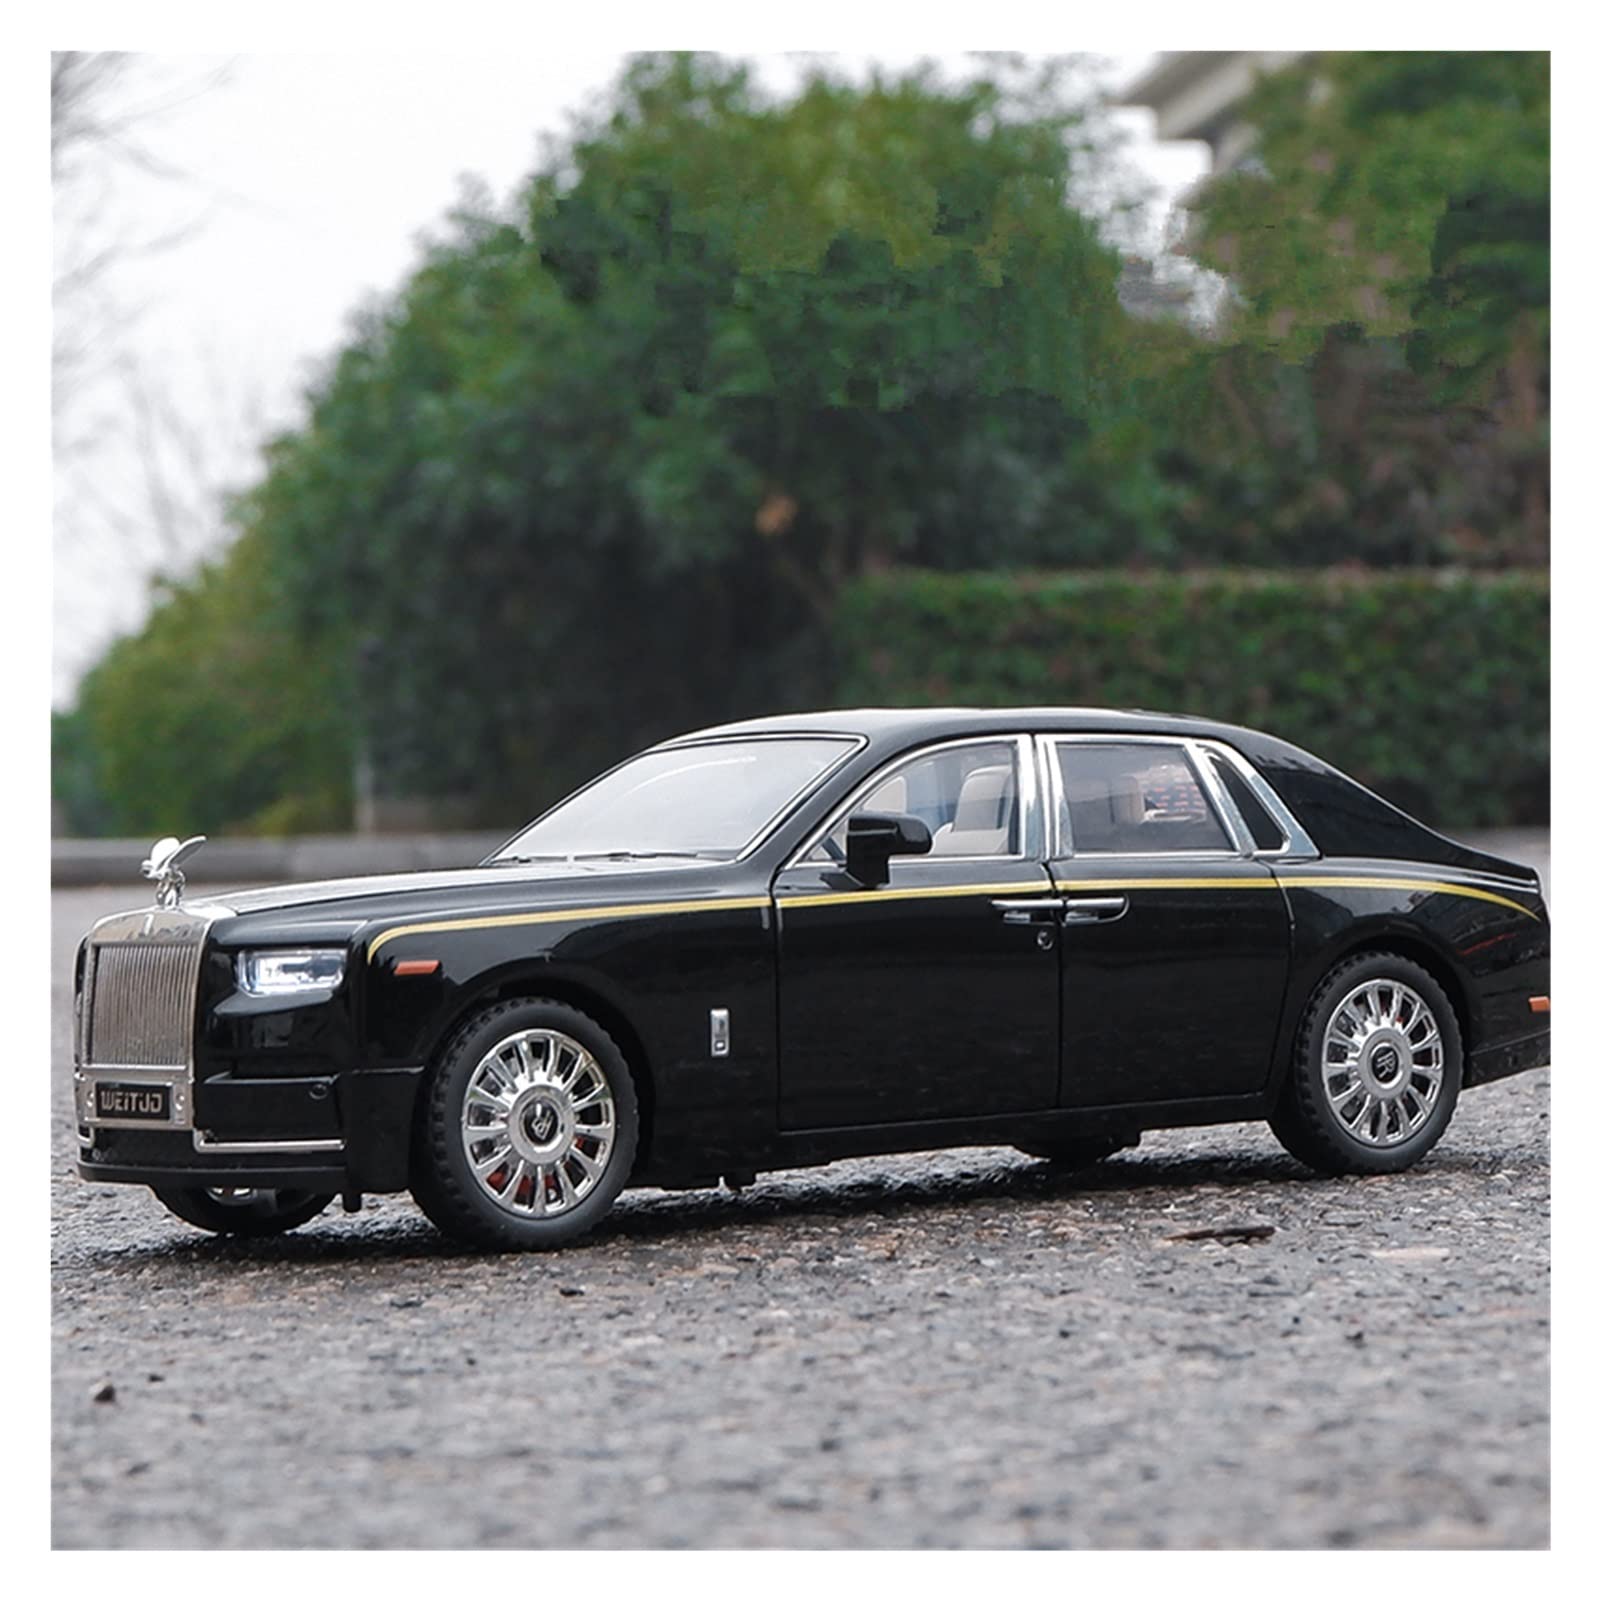 RollsRoyce models to get even more ultraexclusive  Autocar India